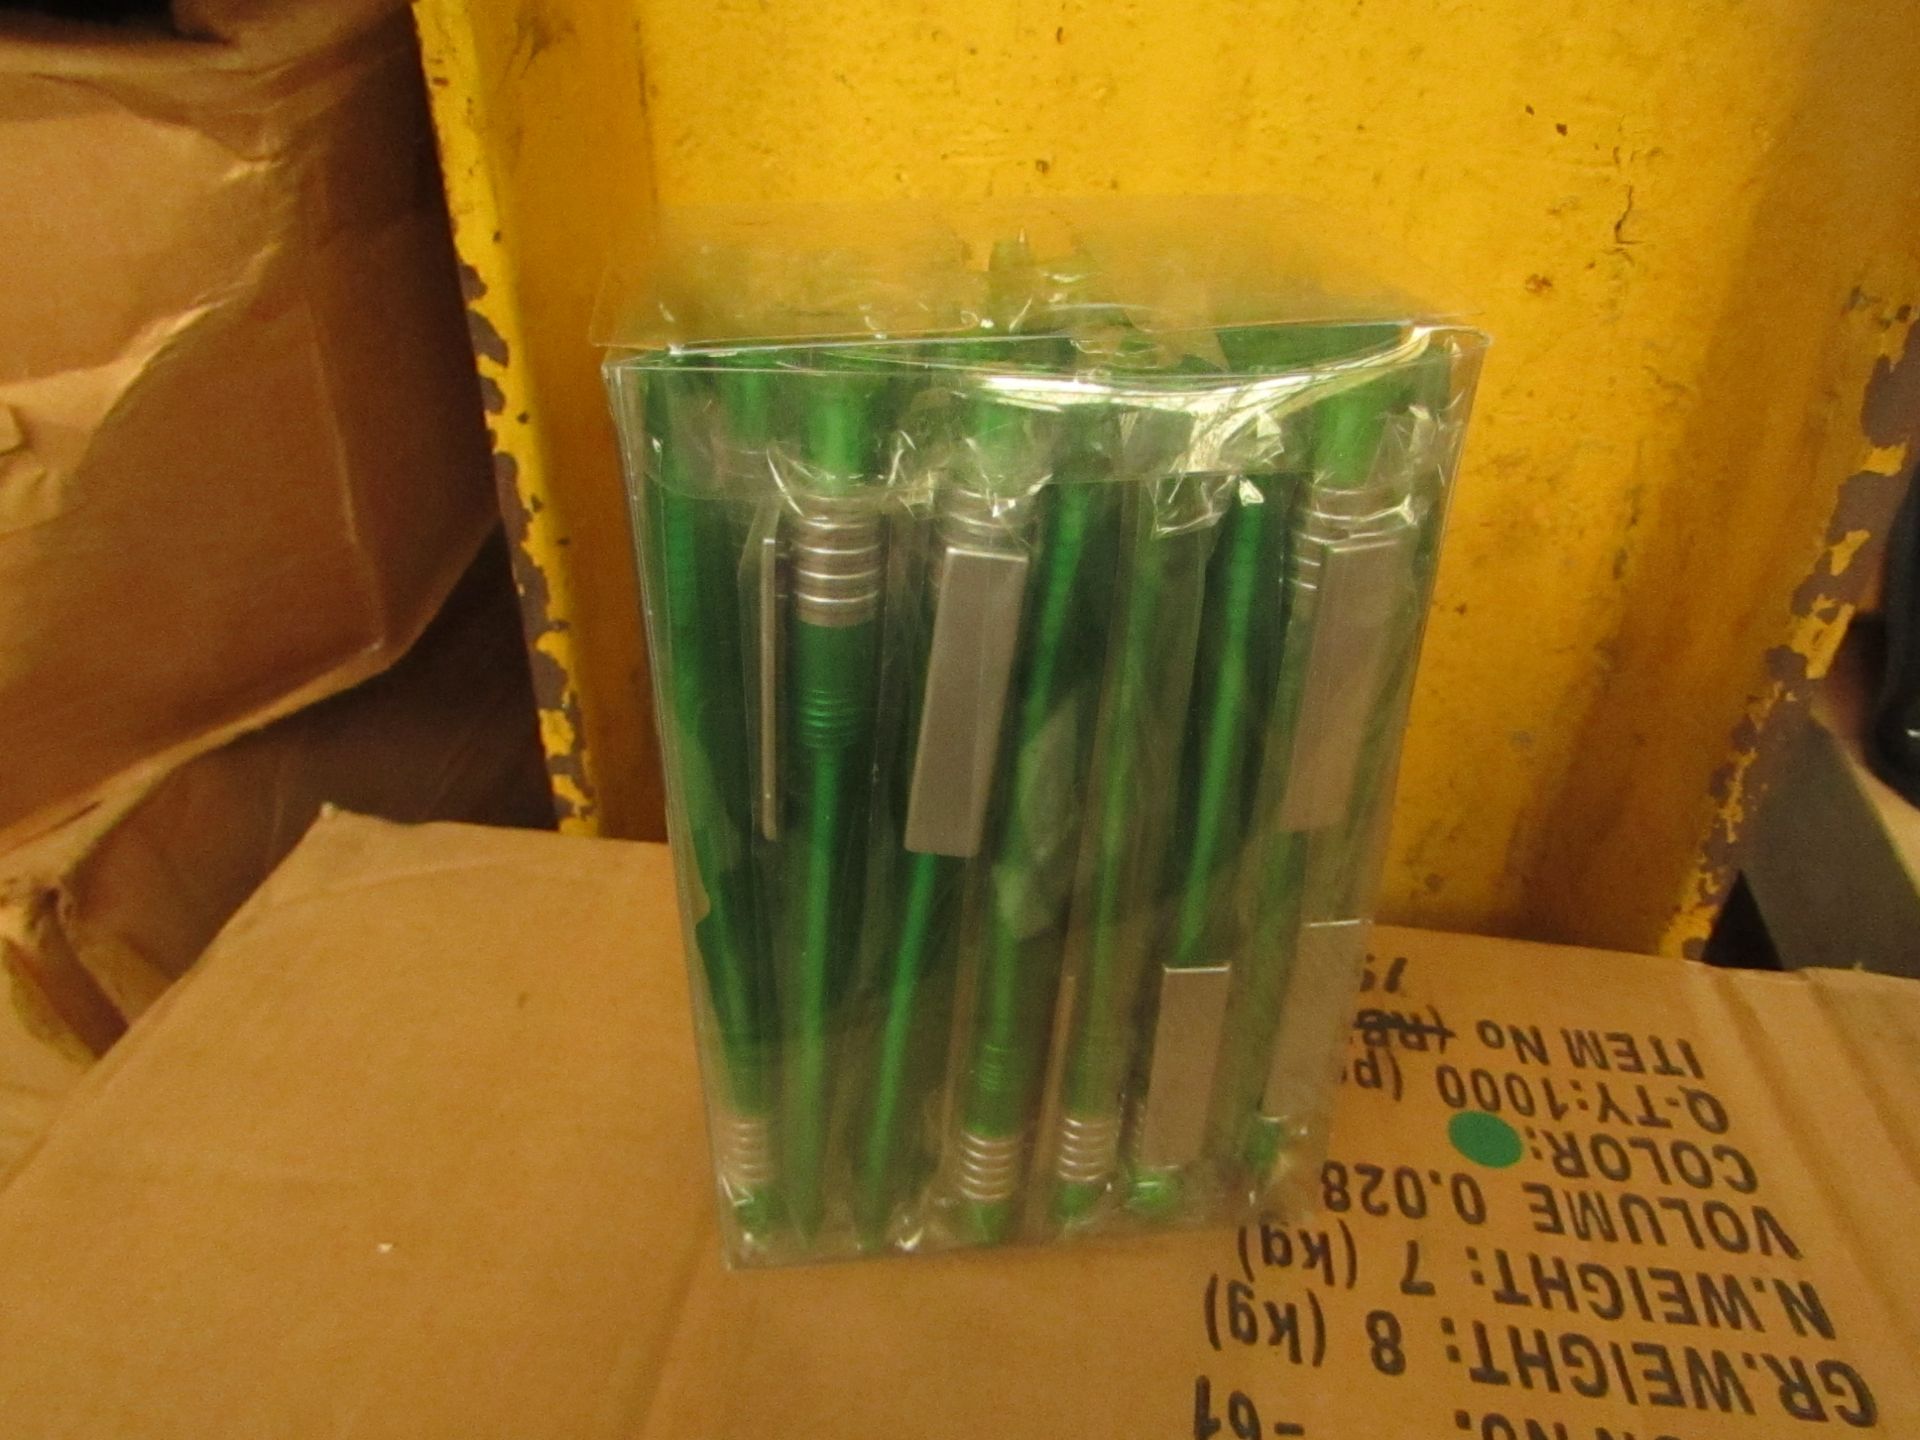 2x Boxes of 50 green black ball point pens, new and packaged.